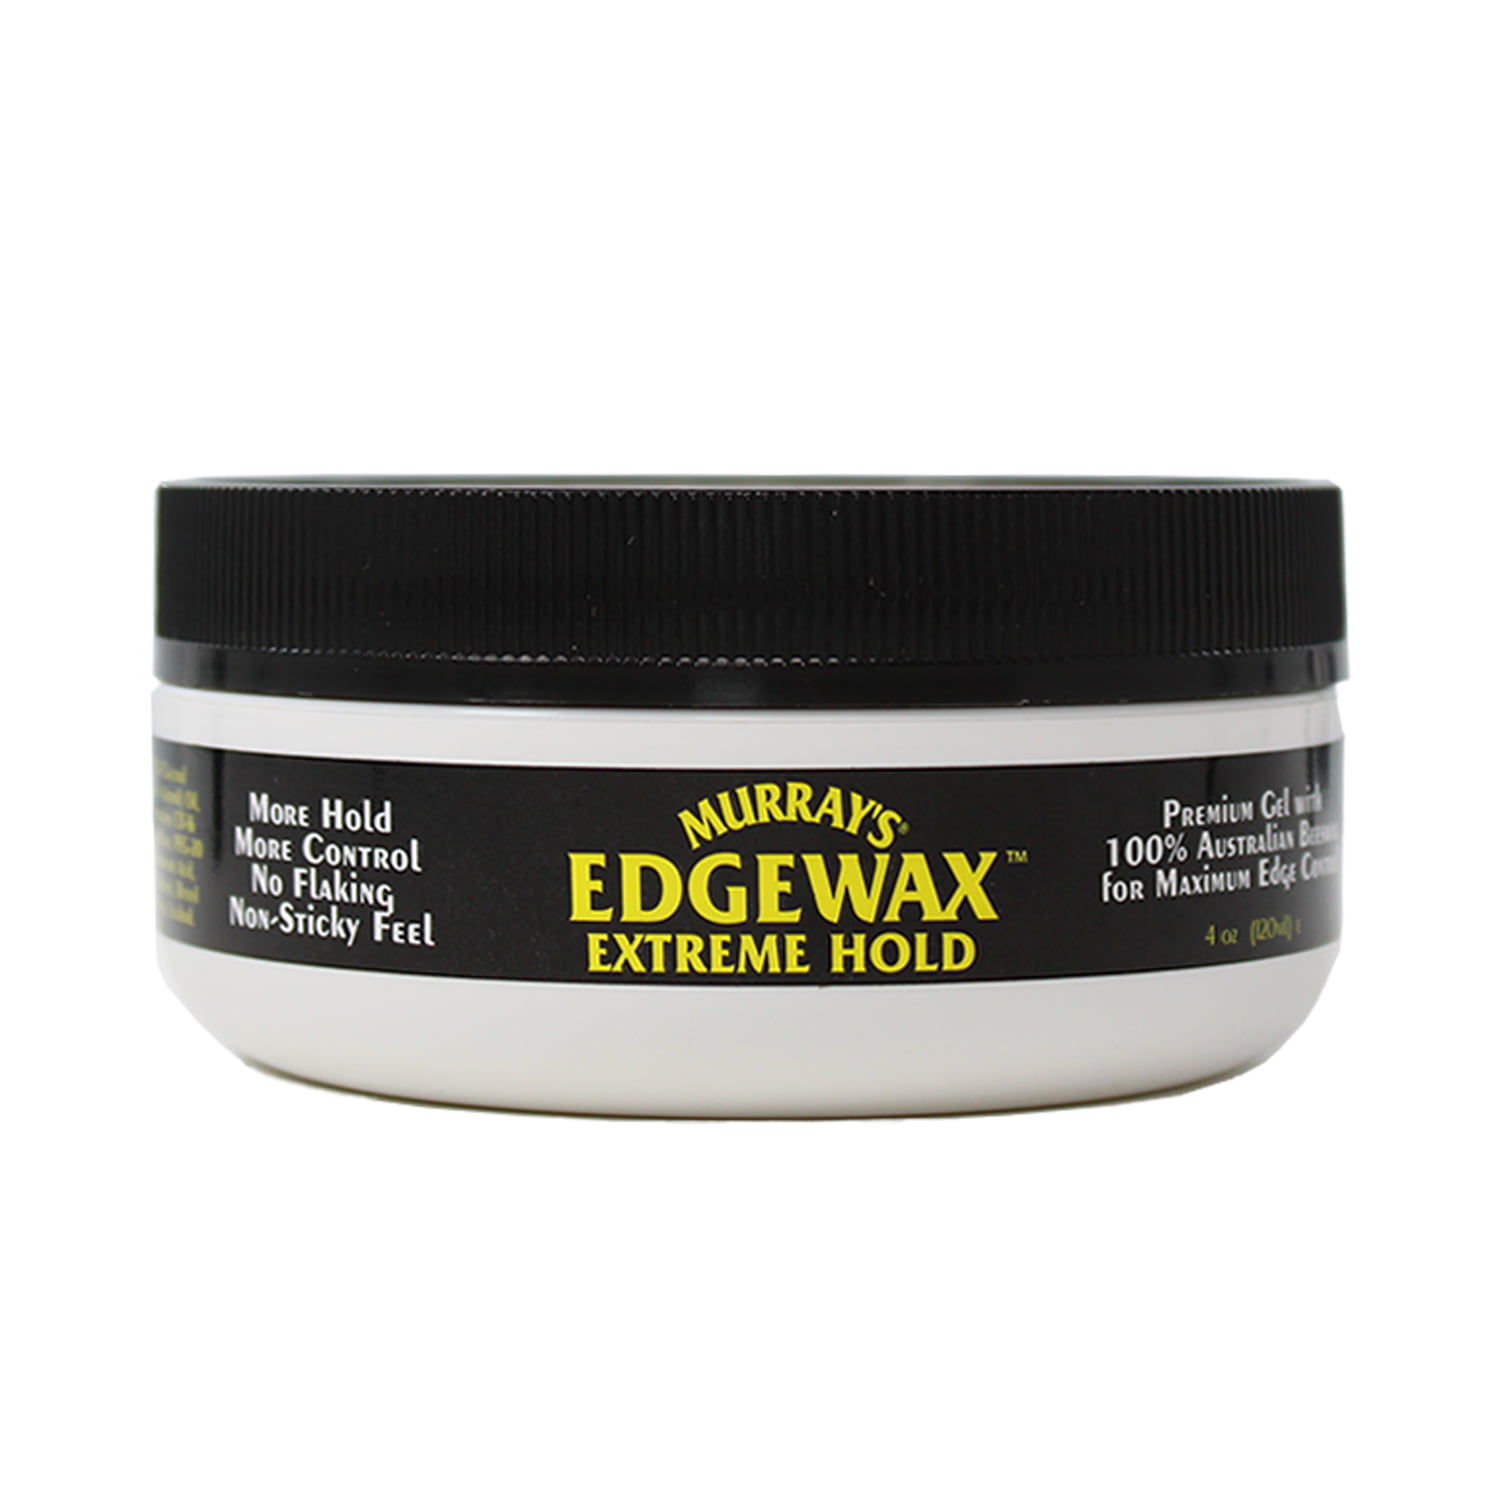 Murray's Edgewax Extreme Hold (4 Oz) - Super Beauty Online